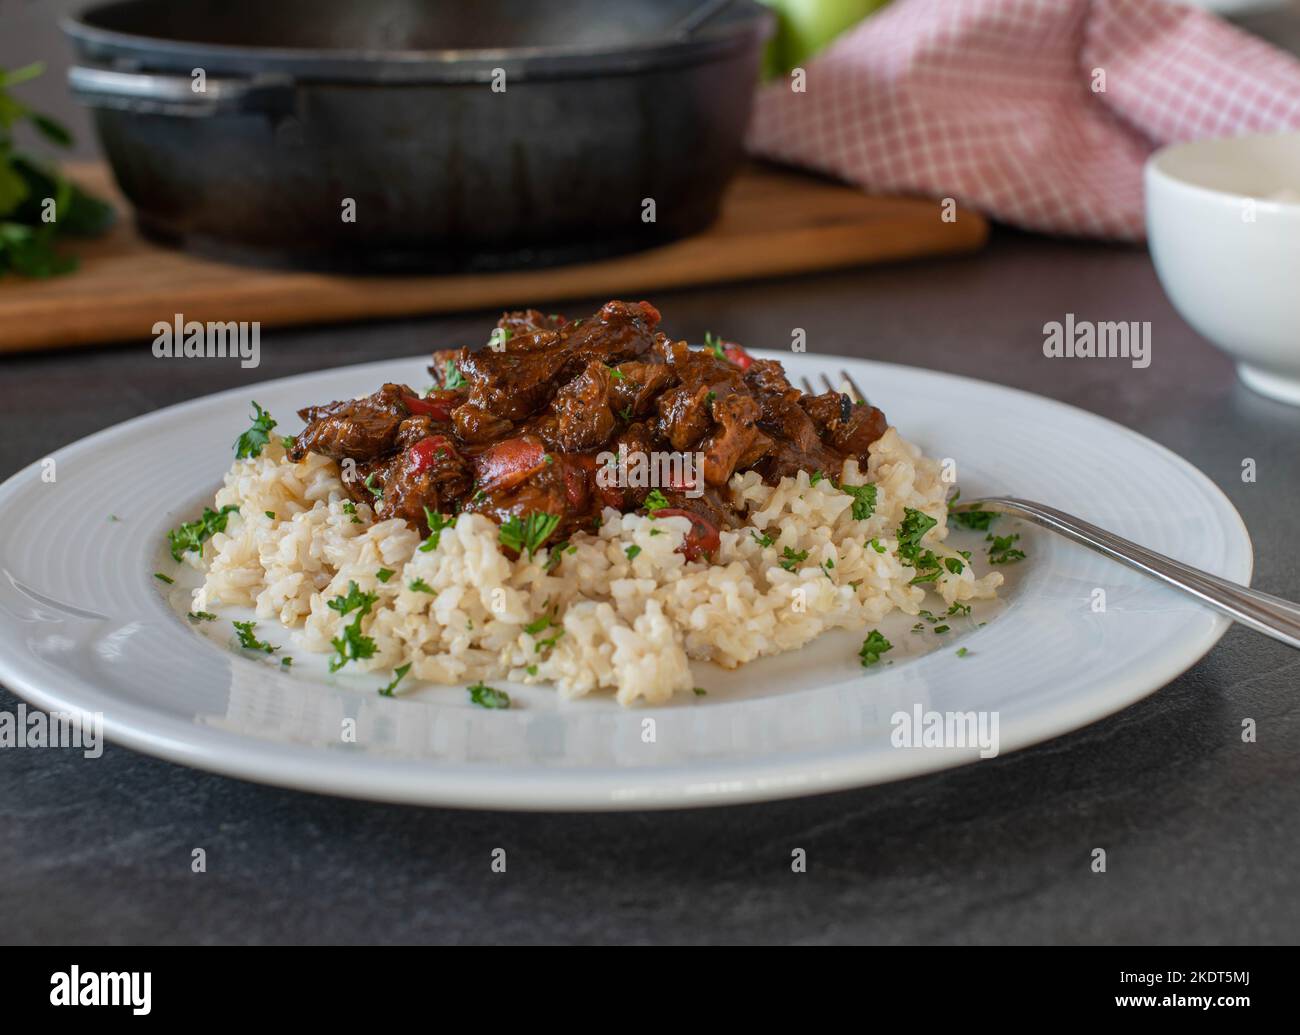 Beef stew with brown rice on a plate Stock Photo